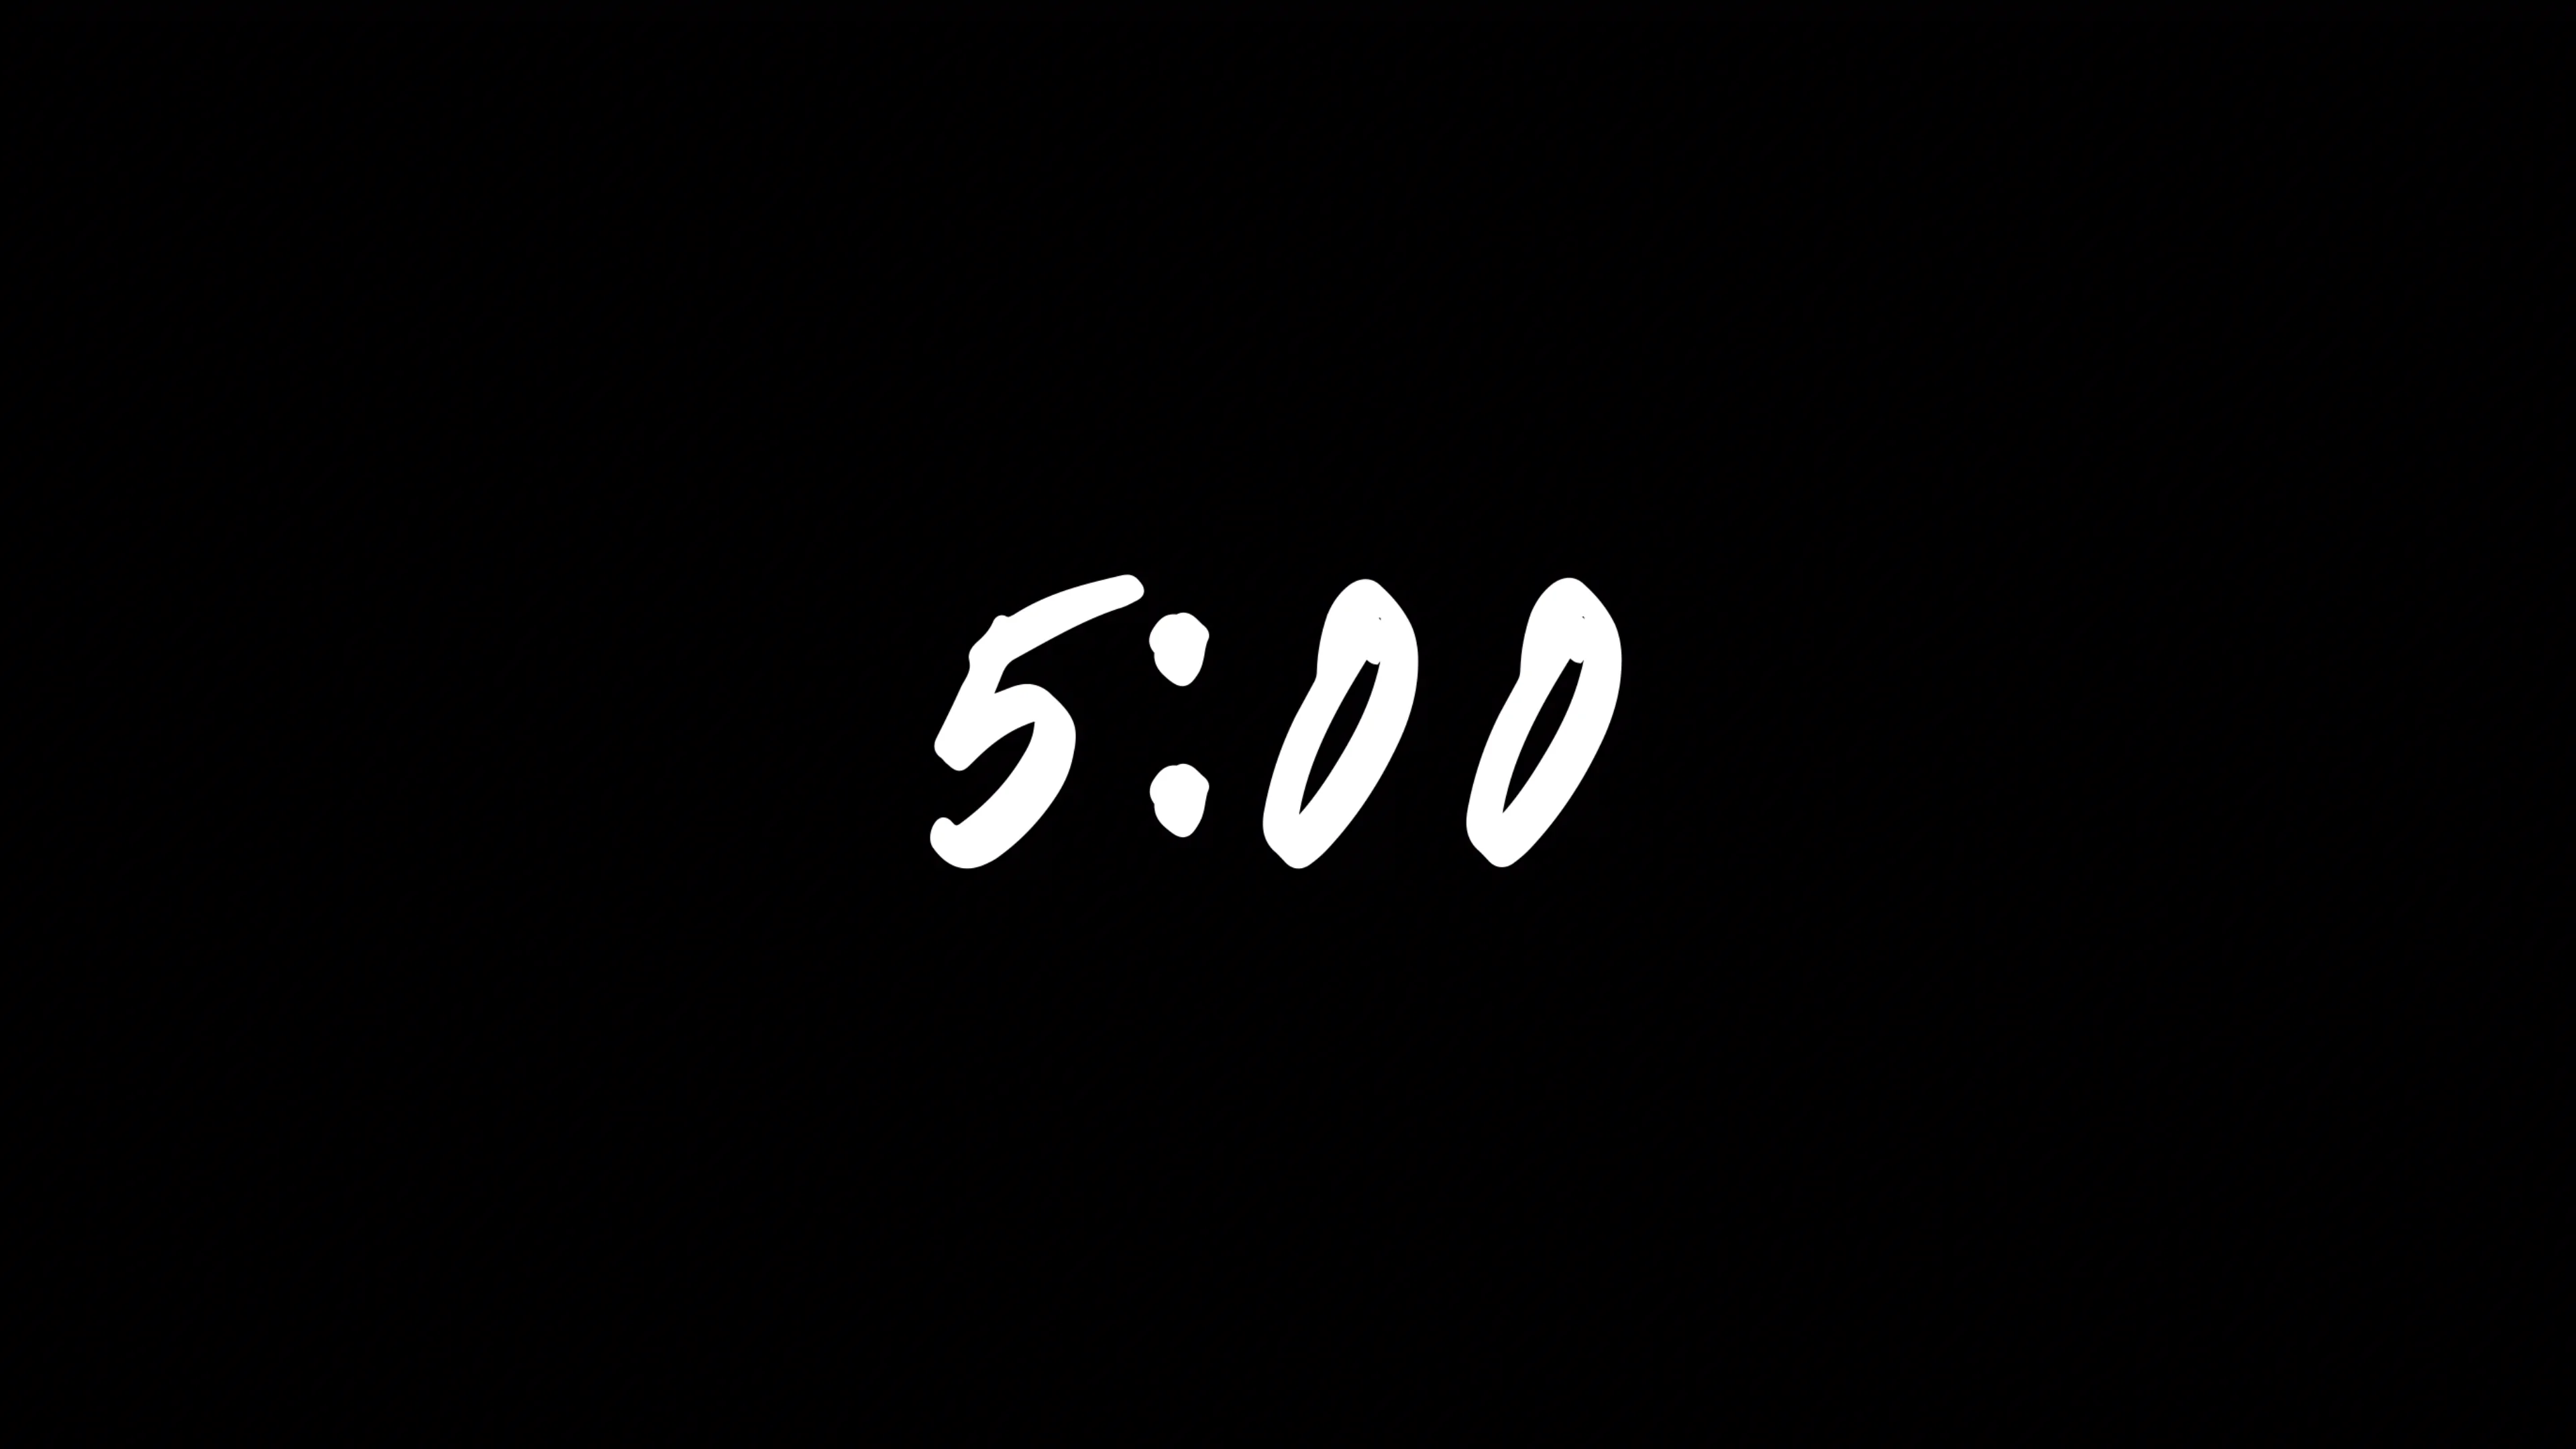 Arial 5 Minute Countdown On White Background on Vimeo